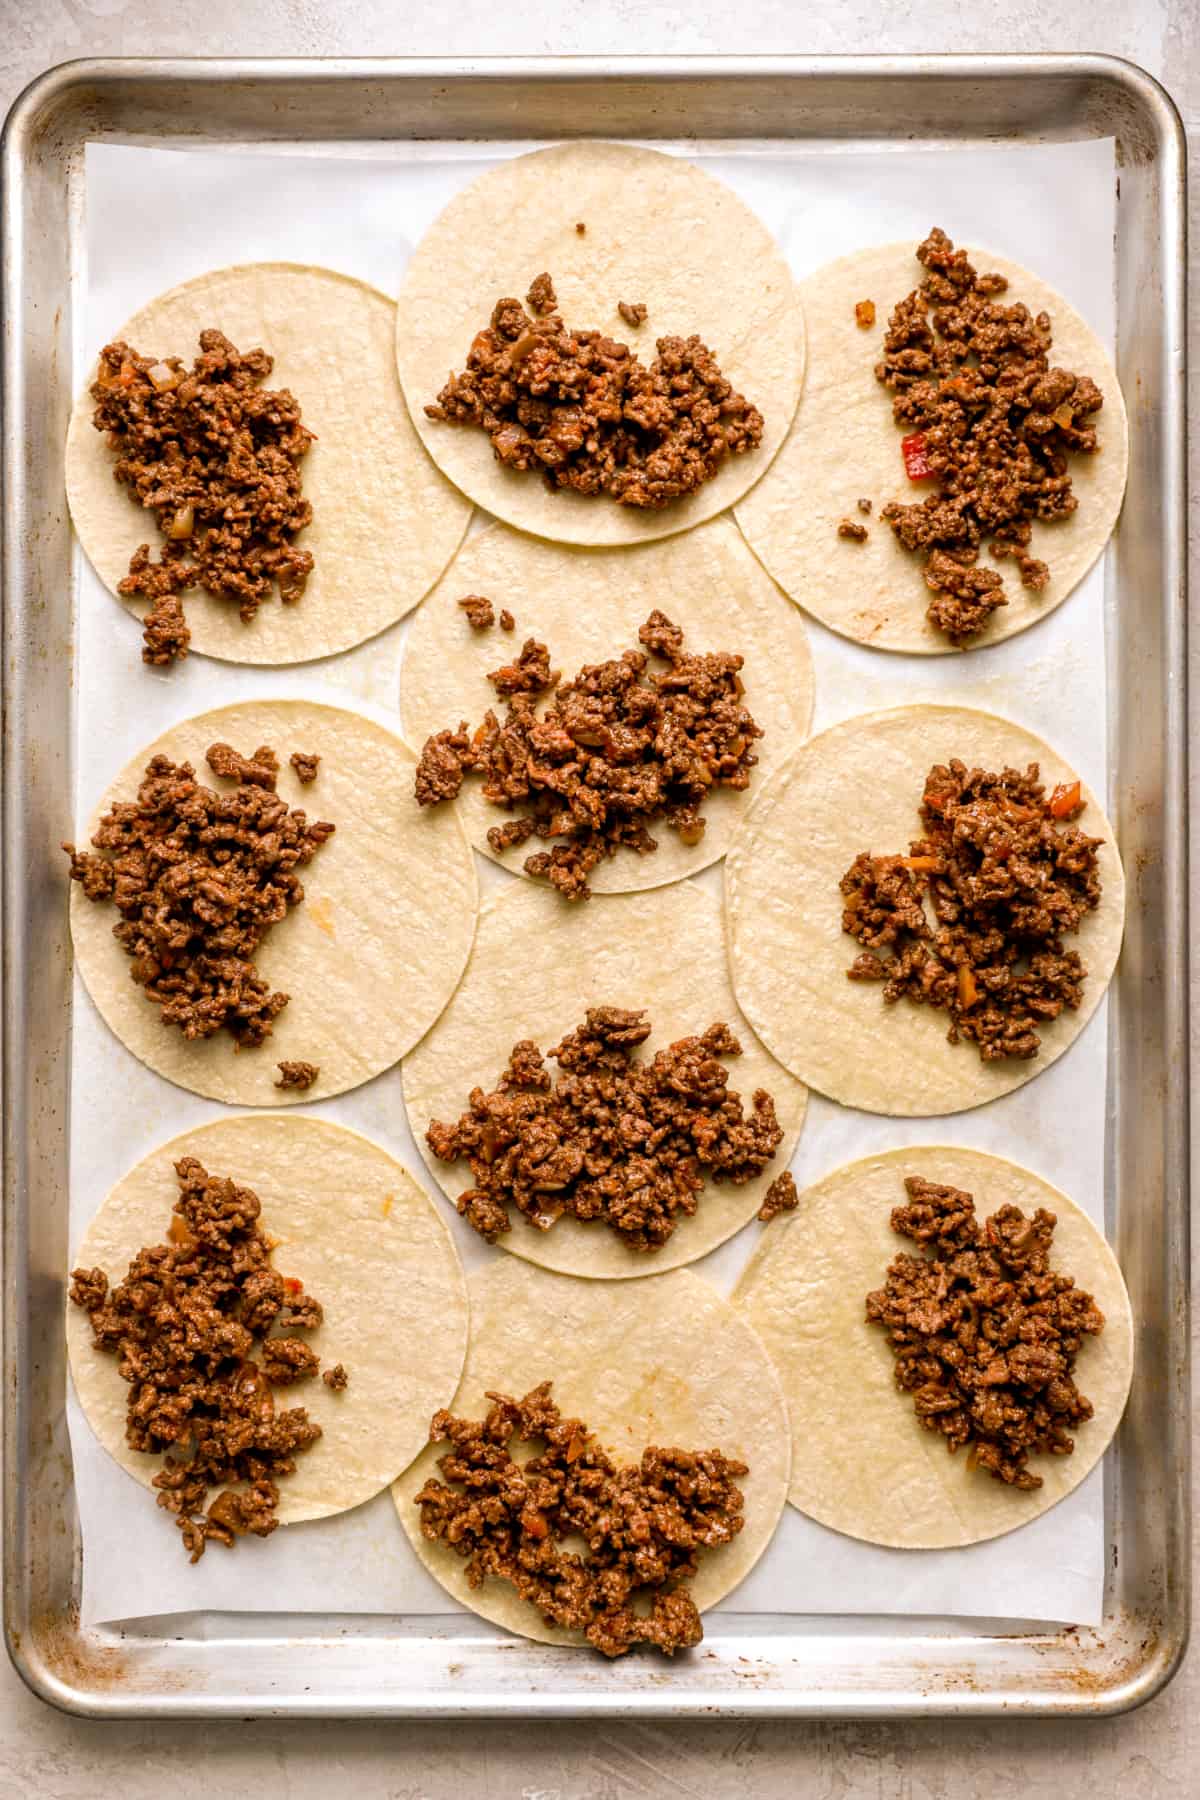 Place tortillas on a baking sheet and top with ground beef.